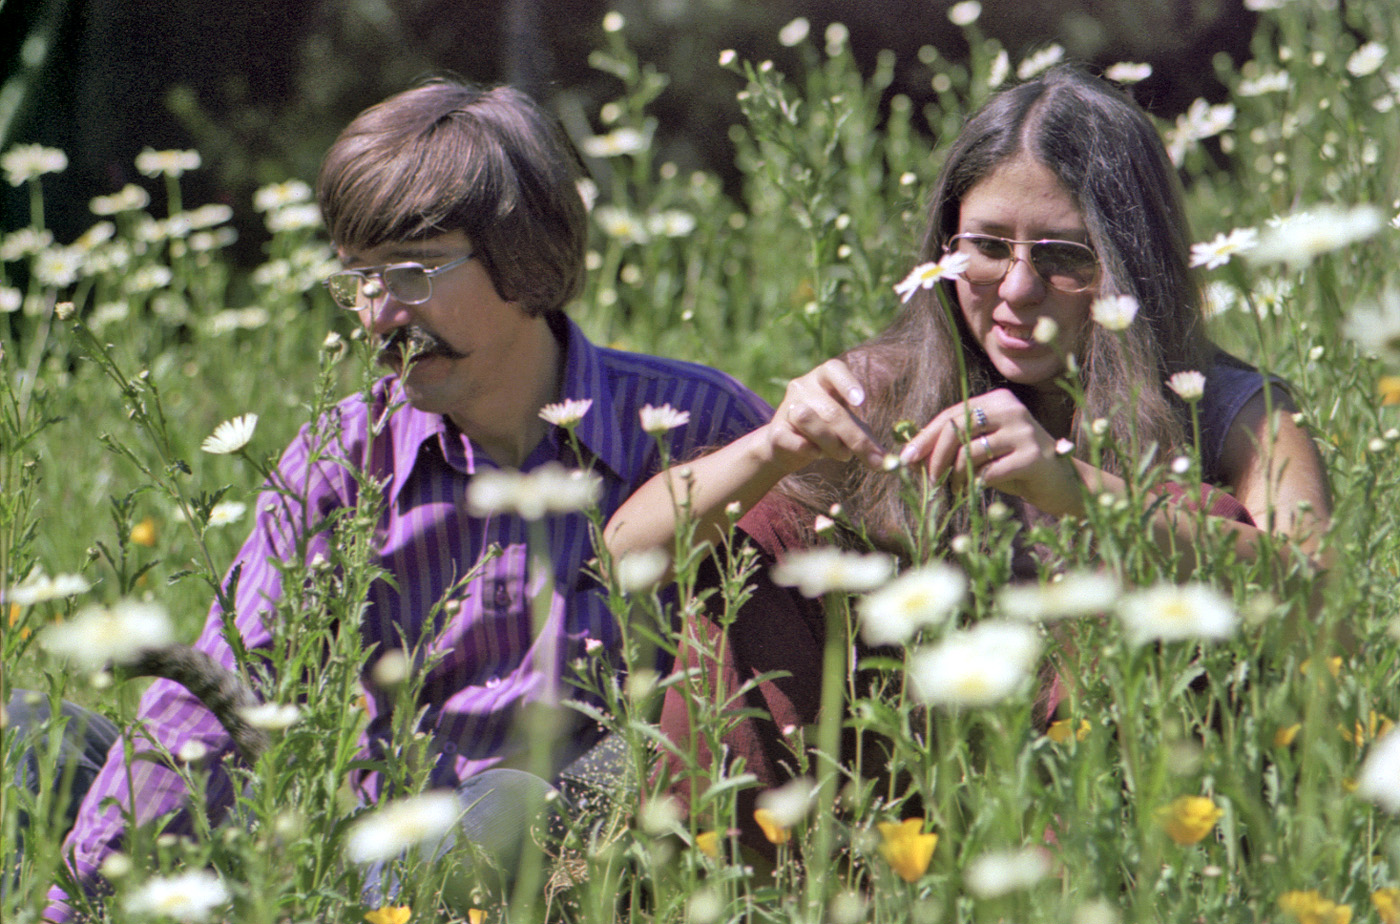 My brother and sister-in-law amongst the daisies and California poppies in our back yard in Larkspur, California, captured by me on 35mm Kodacolor. When I was a kid, we called this this vacant lot "The Field," as it was covered mainly by wild oats, thus making it perfect for summertime sledding on wax-coated cardboard carton pieces. The wax was actually from slabs of paraffin my mother used in jam and jelly making. How Norman Rockwell can you get. View full size.